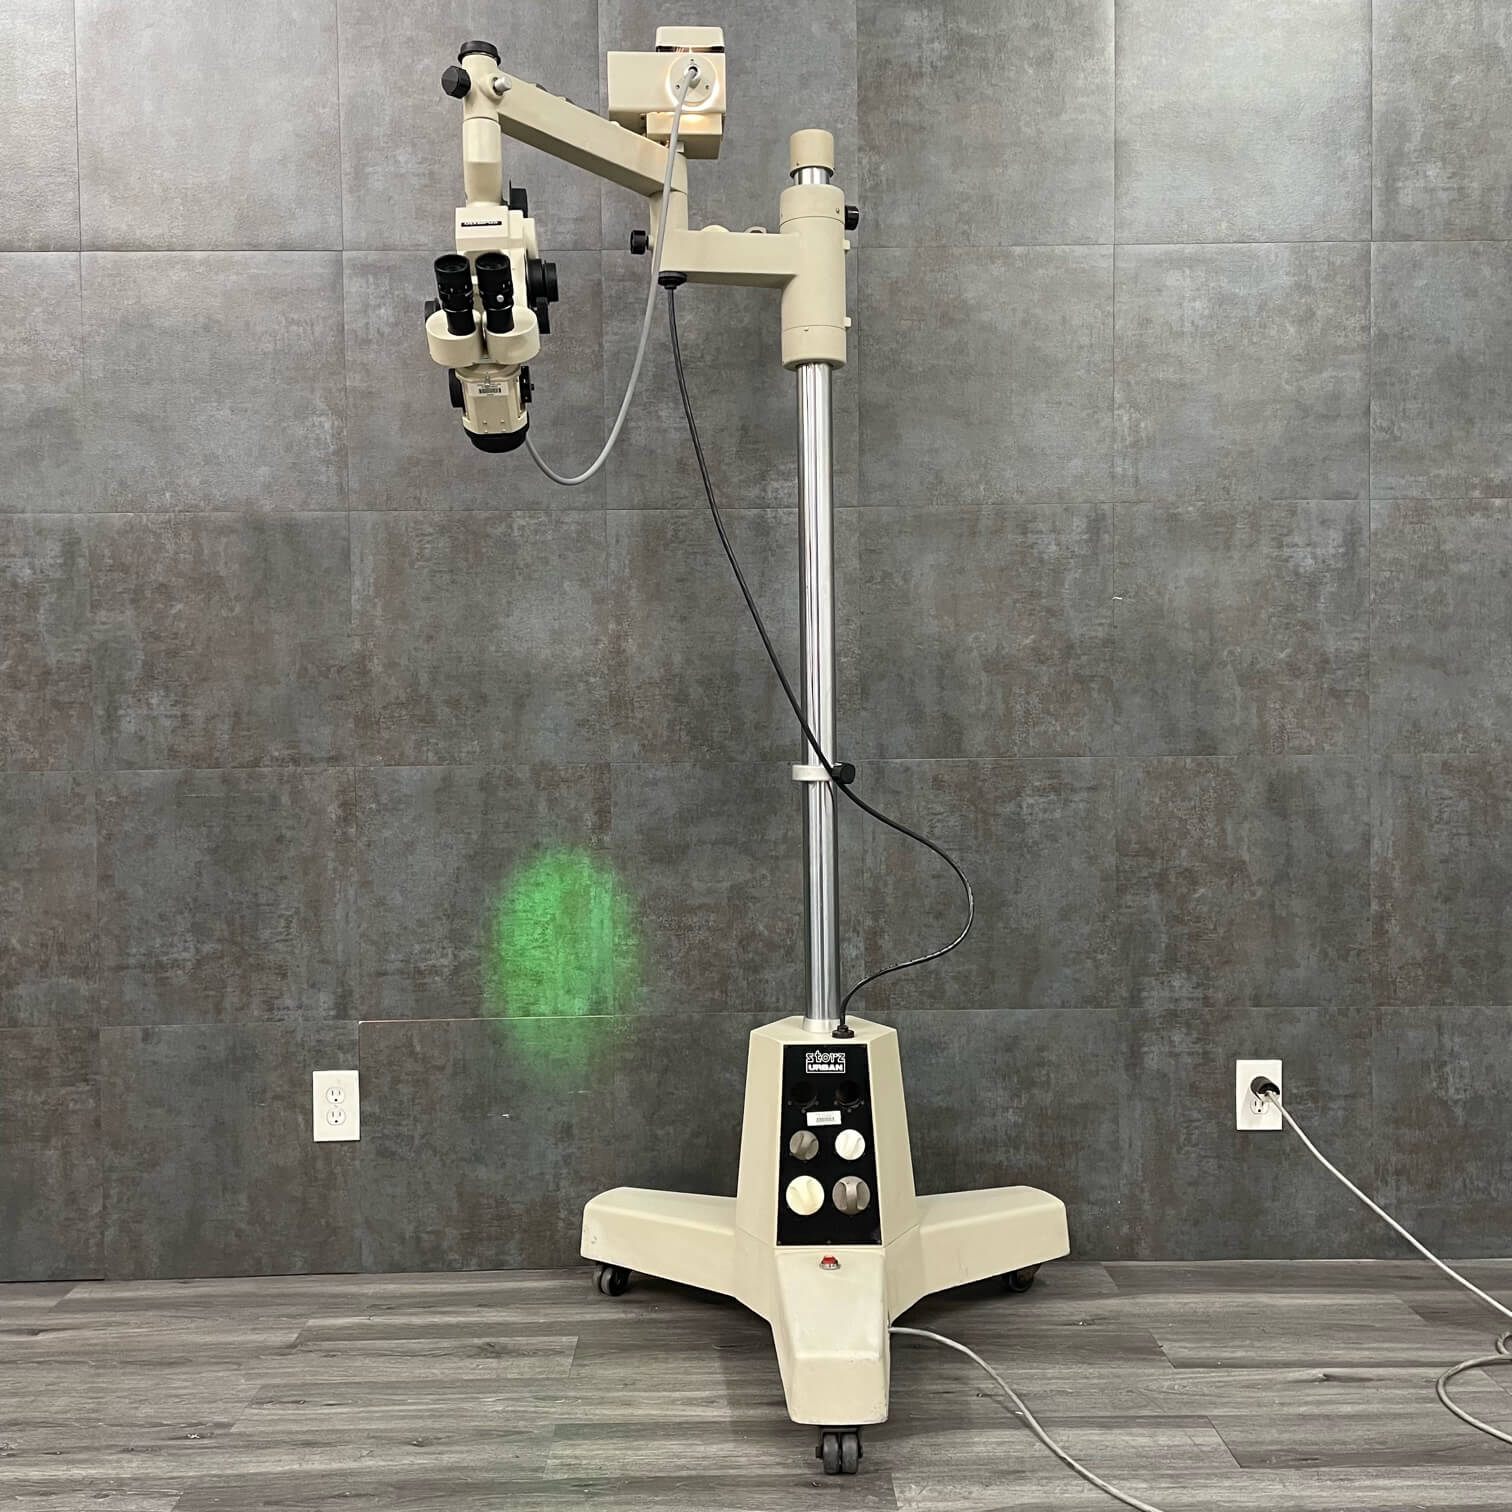 Storz Urban Surgical Microscope